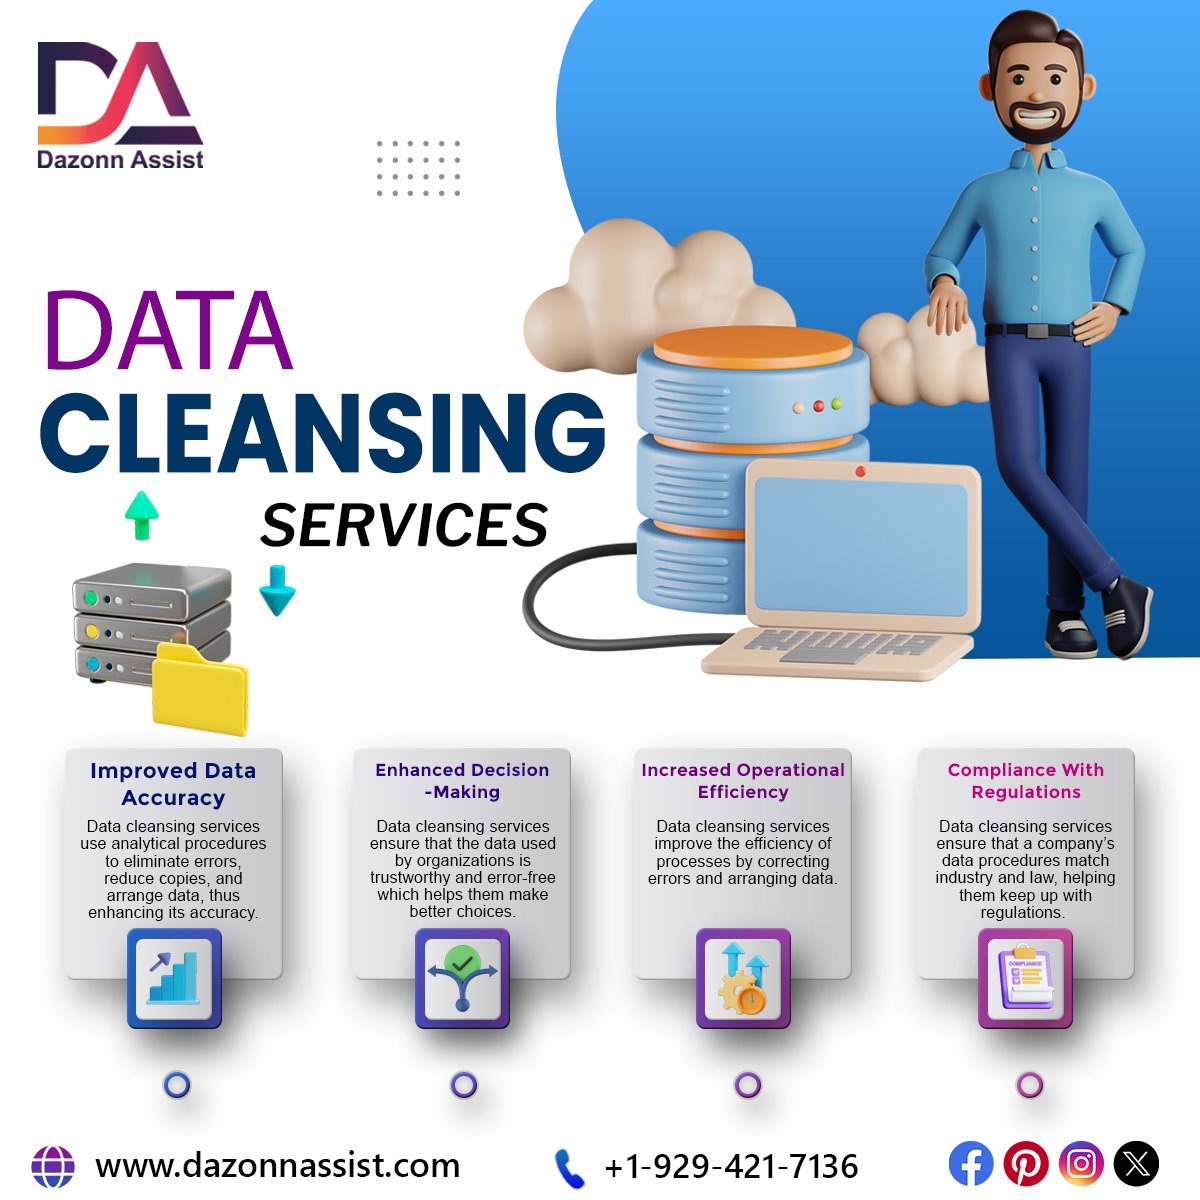 🌟 Struggling to maintain clean and accurate data? Let Dazonn Assist handle it for you! 🚀 Our expert team specializes in Data Cleansing Services, ensuring your data is error-free and up-to-date. #DataCleansing #OutsourceServices #DazonnAssist 📊✨
🌐 dazonnassist.com/data-cleansing…